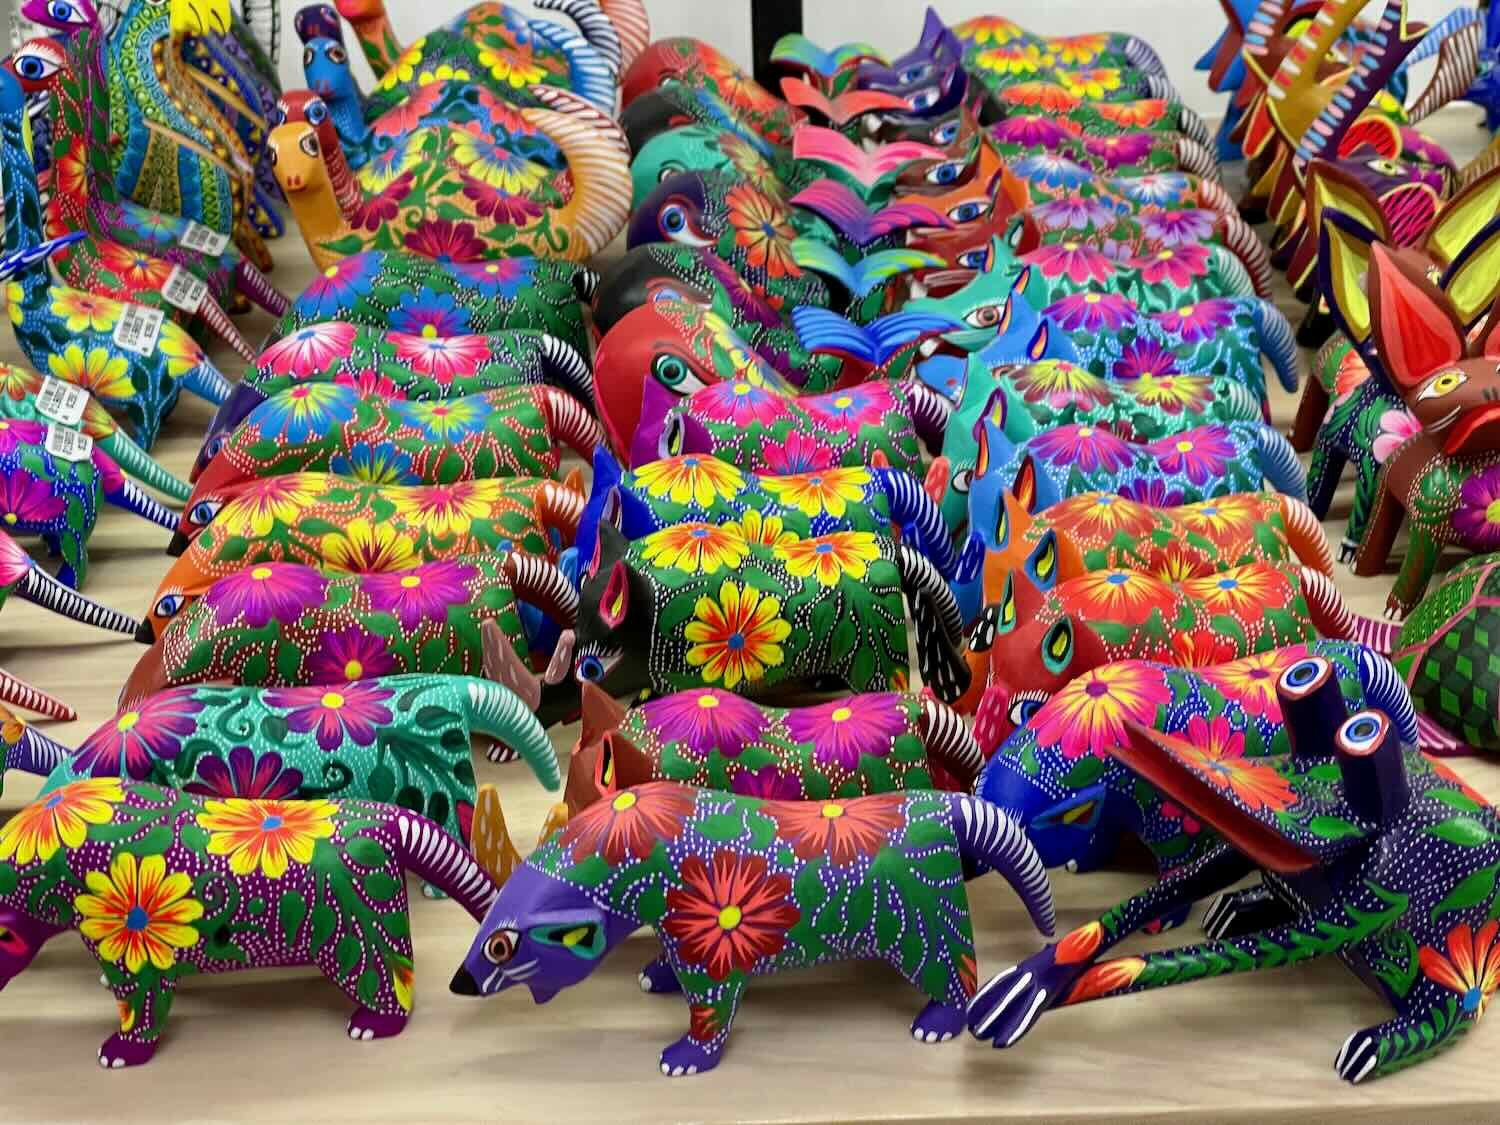 The colors of the alebrijes are incredibly bright